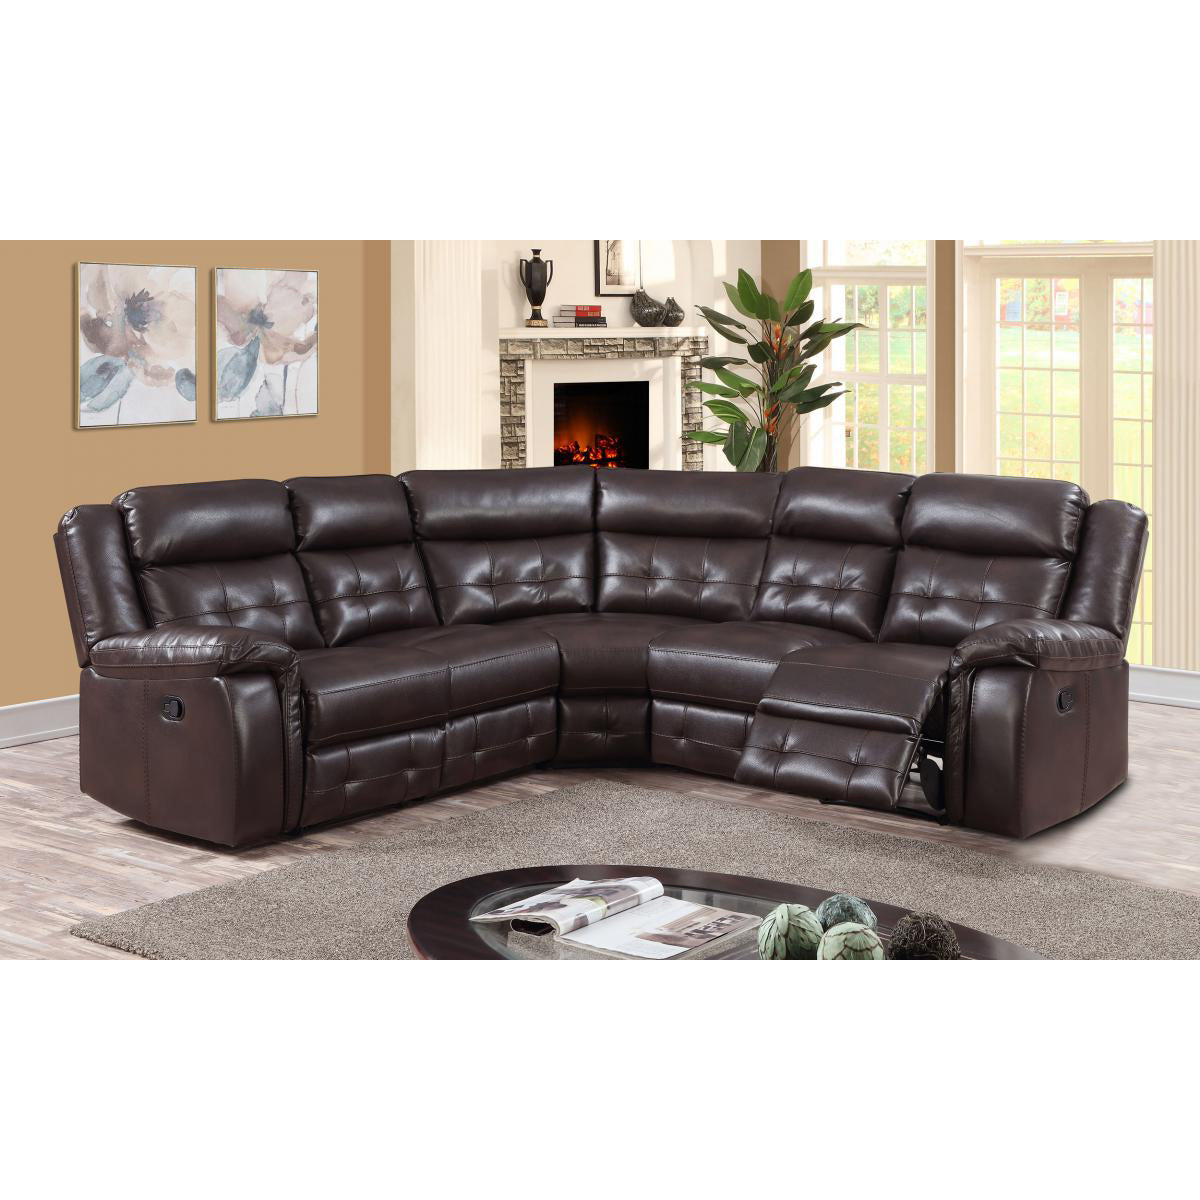 Cobalt Recliner Leatherlux And PU Corner Group Expresso